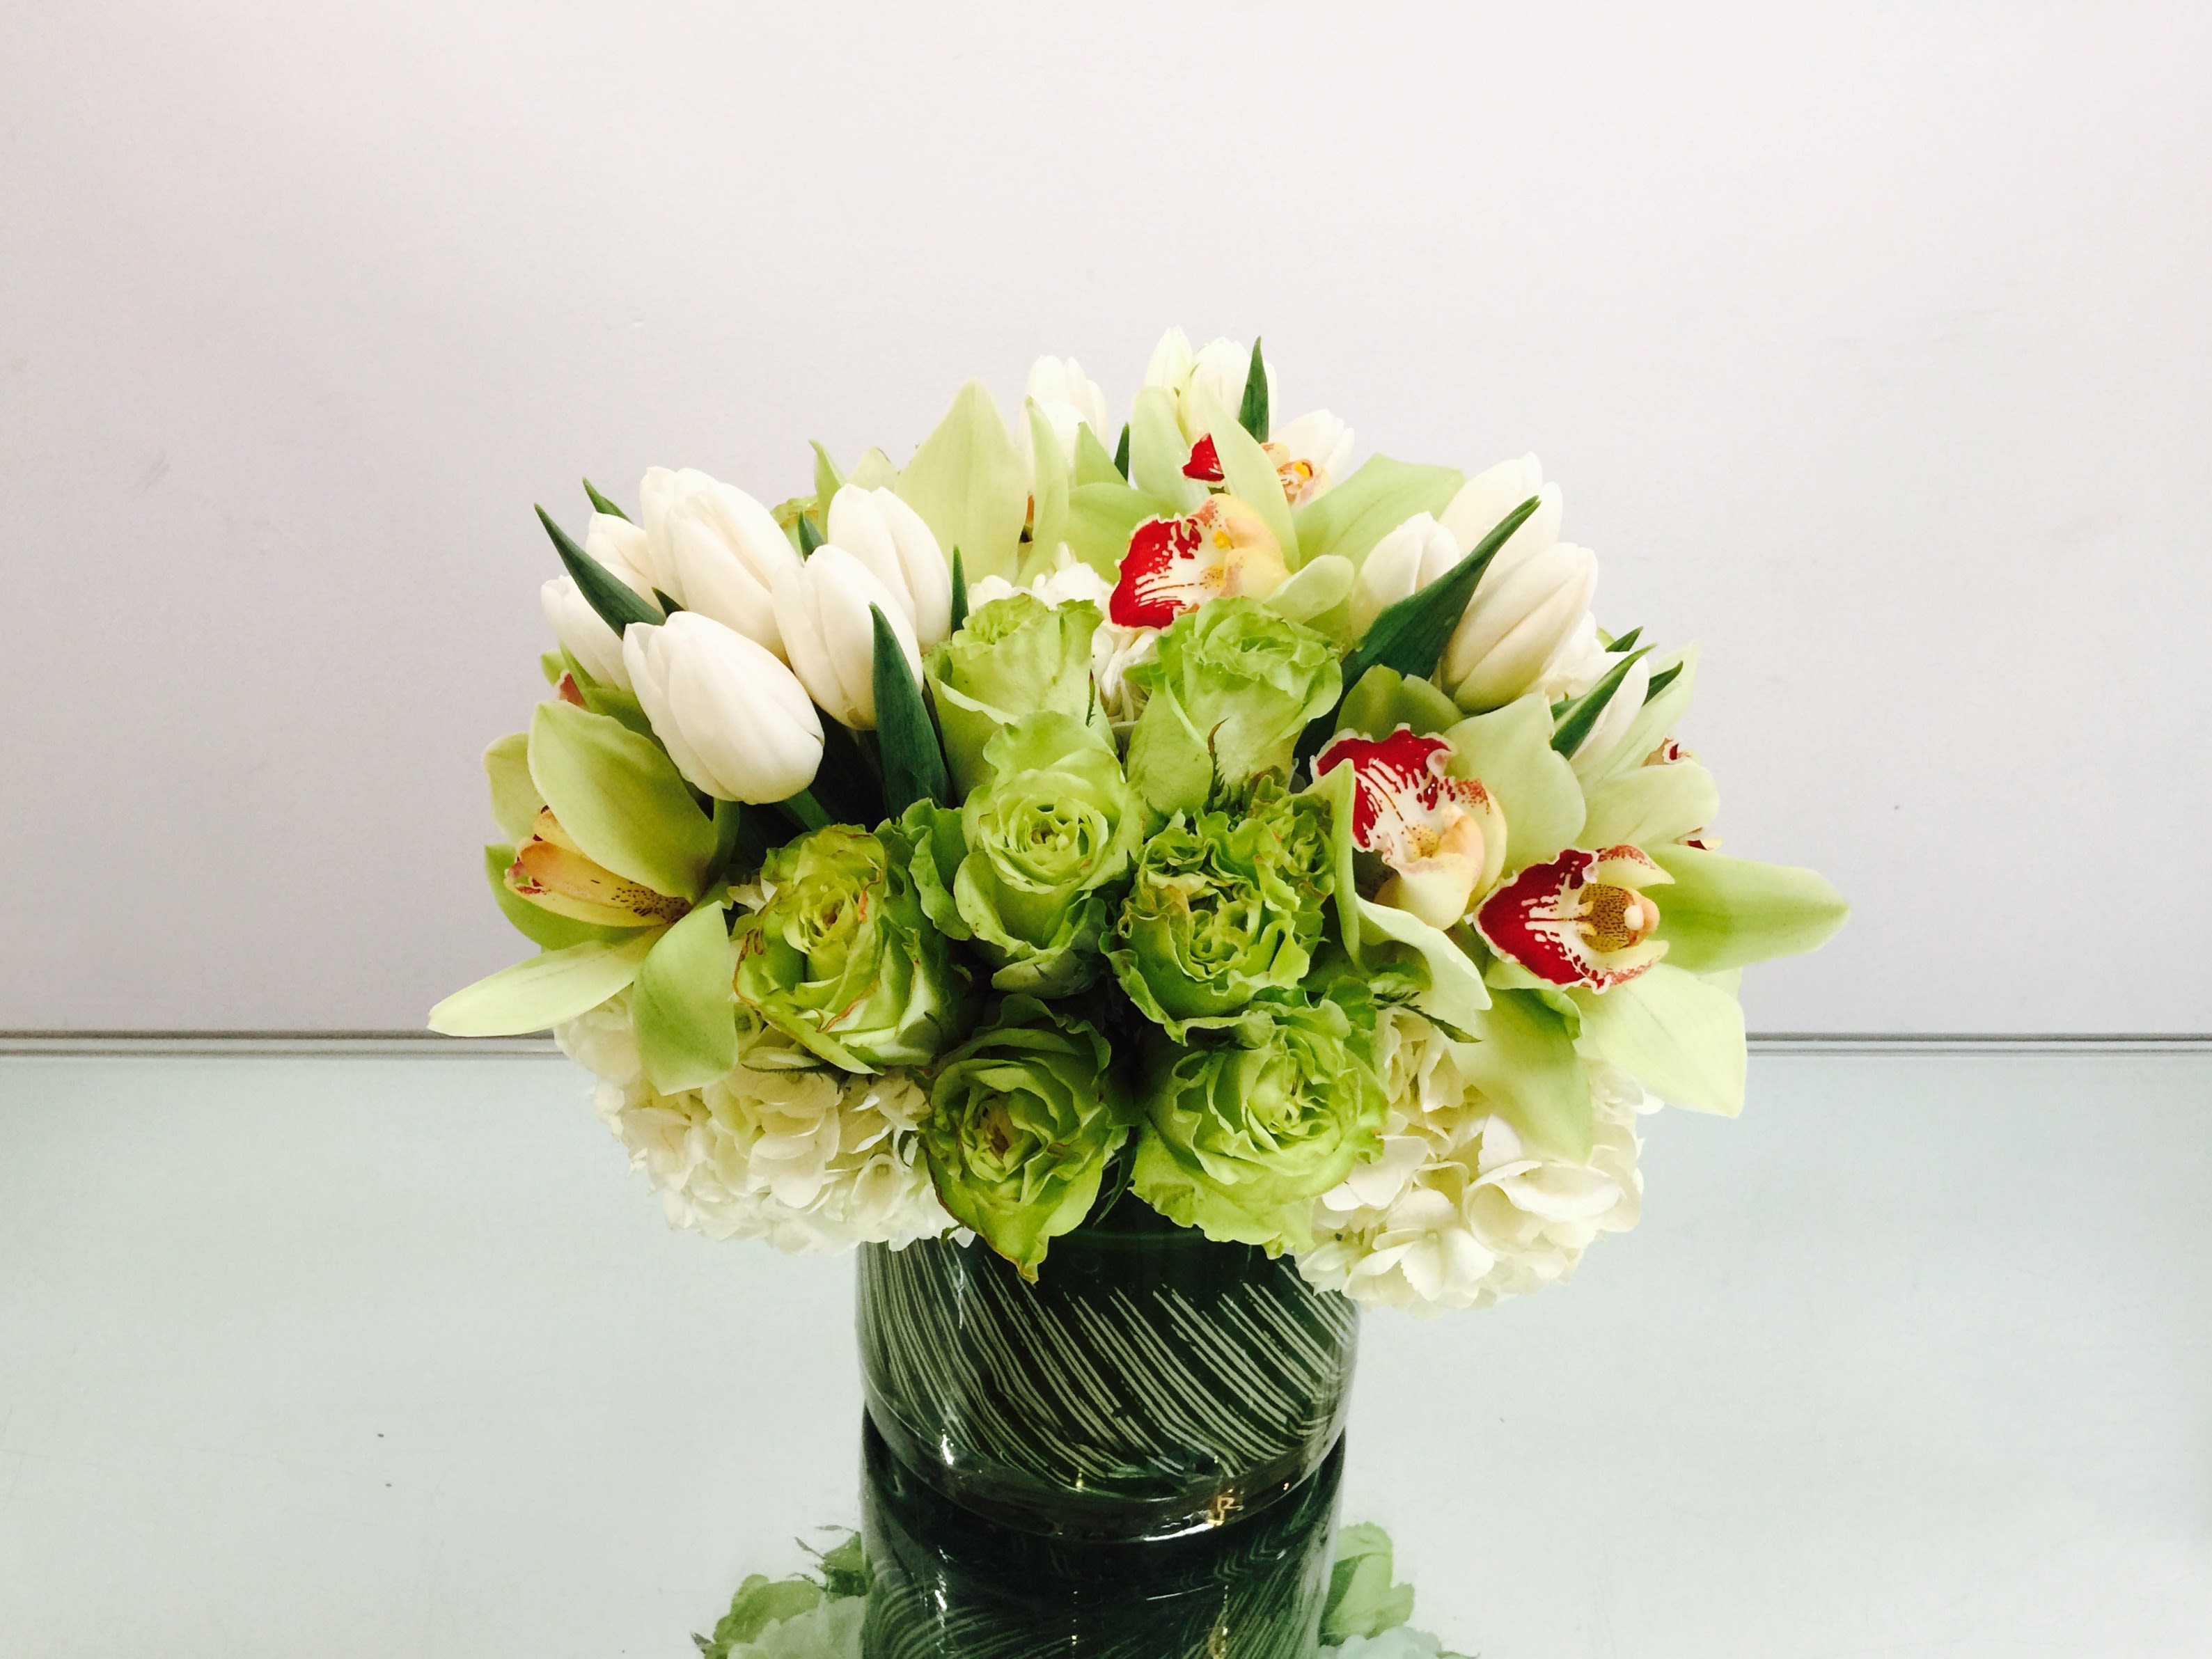 Spring Sweet - Fresh green arrangement with white tulips, pale green roses, green cymbidium, and white hydrangeas in a decorative glass vase.